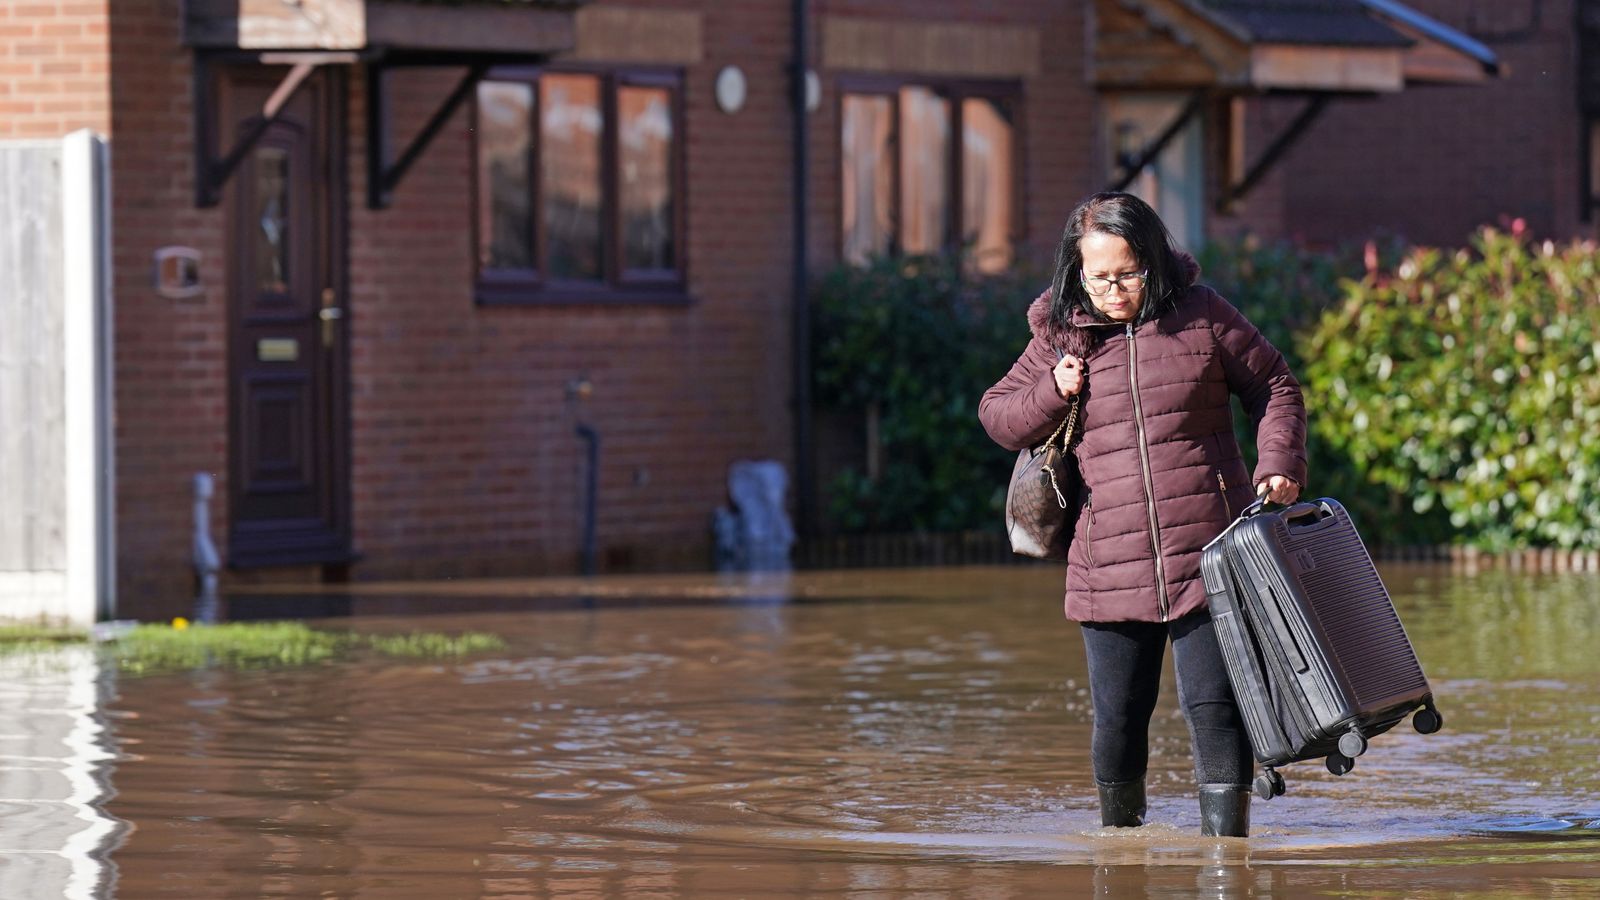 UK weather: Warnings of more floods and ice after Storm Babet leaves hundreds of homes submerged